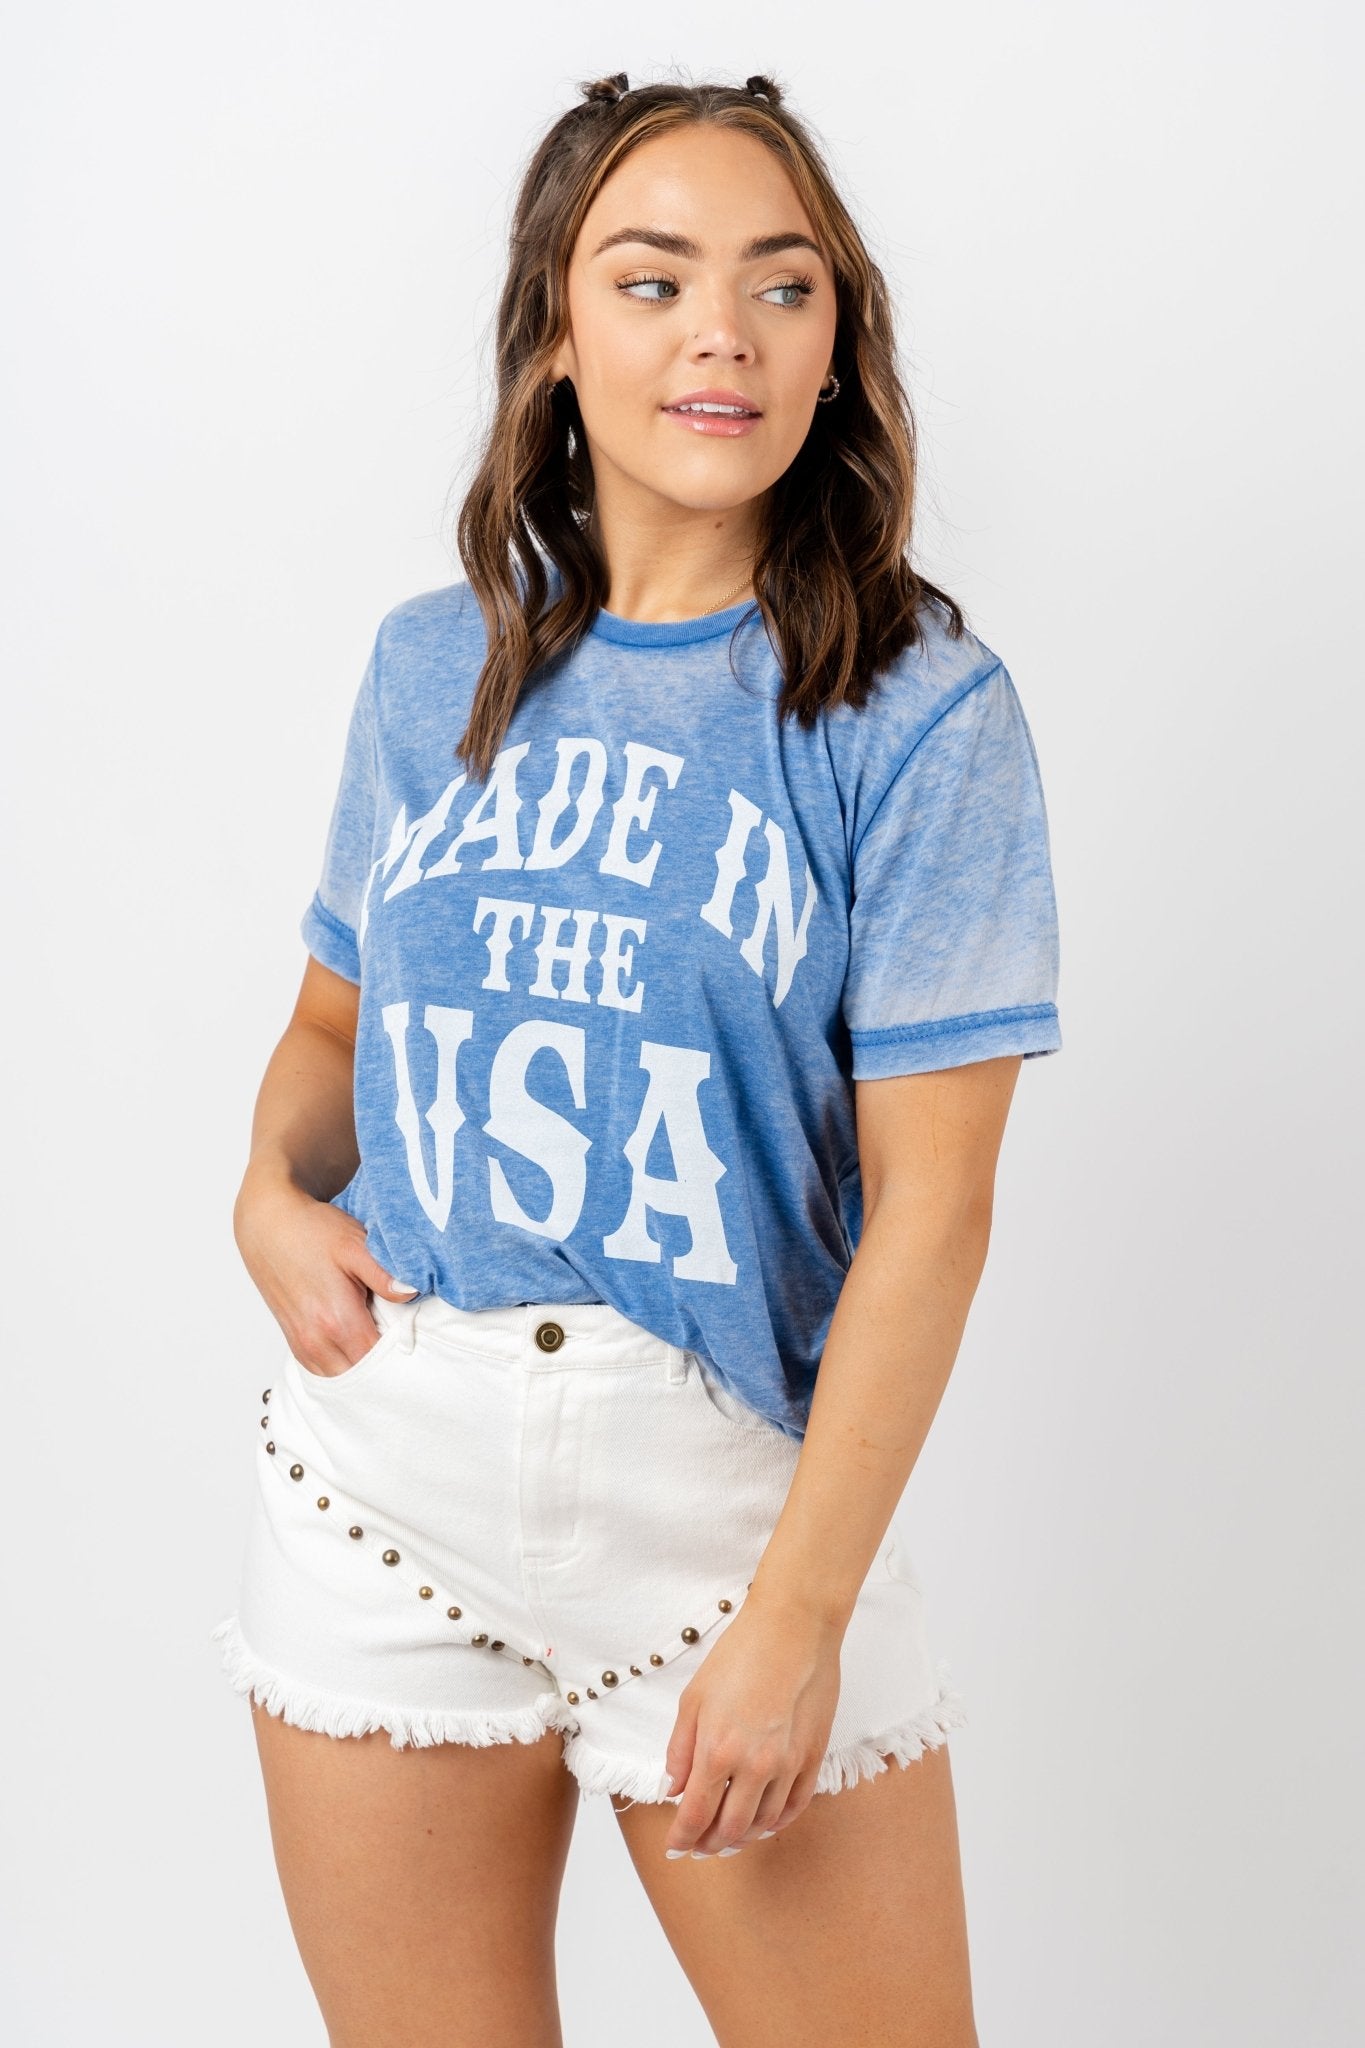 Made in the USA acid wash t-shirt blue - Cute T-shirts - Fun American Summer Outfits at Lush Fashion Lounge Boutique in Oklahoma City